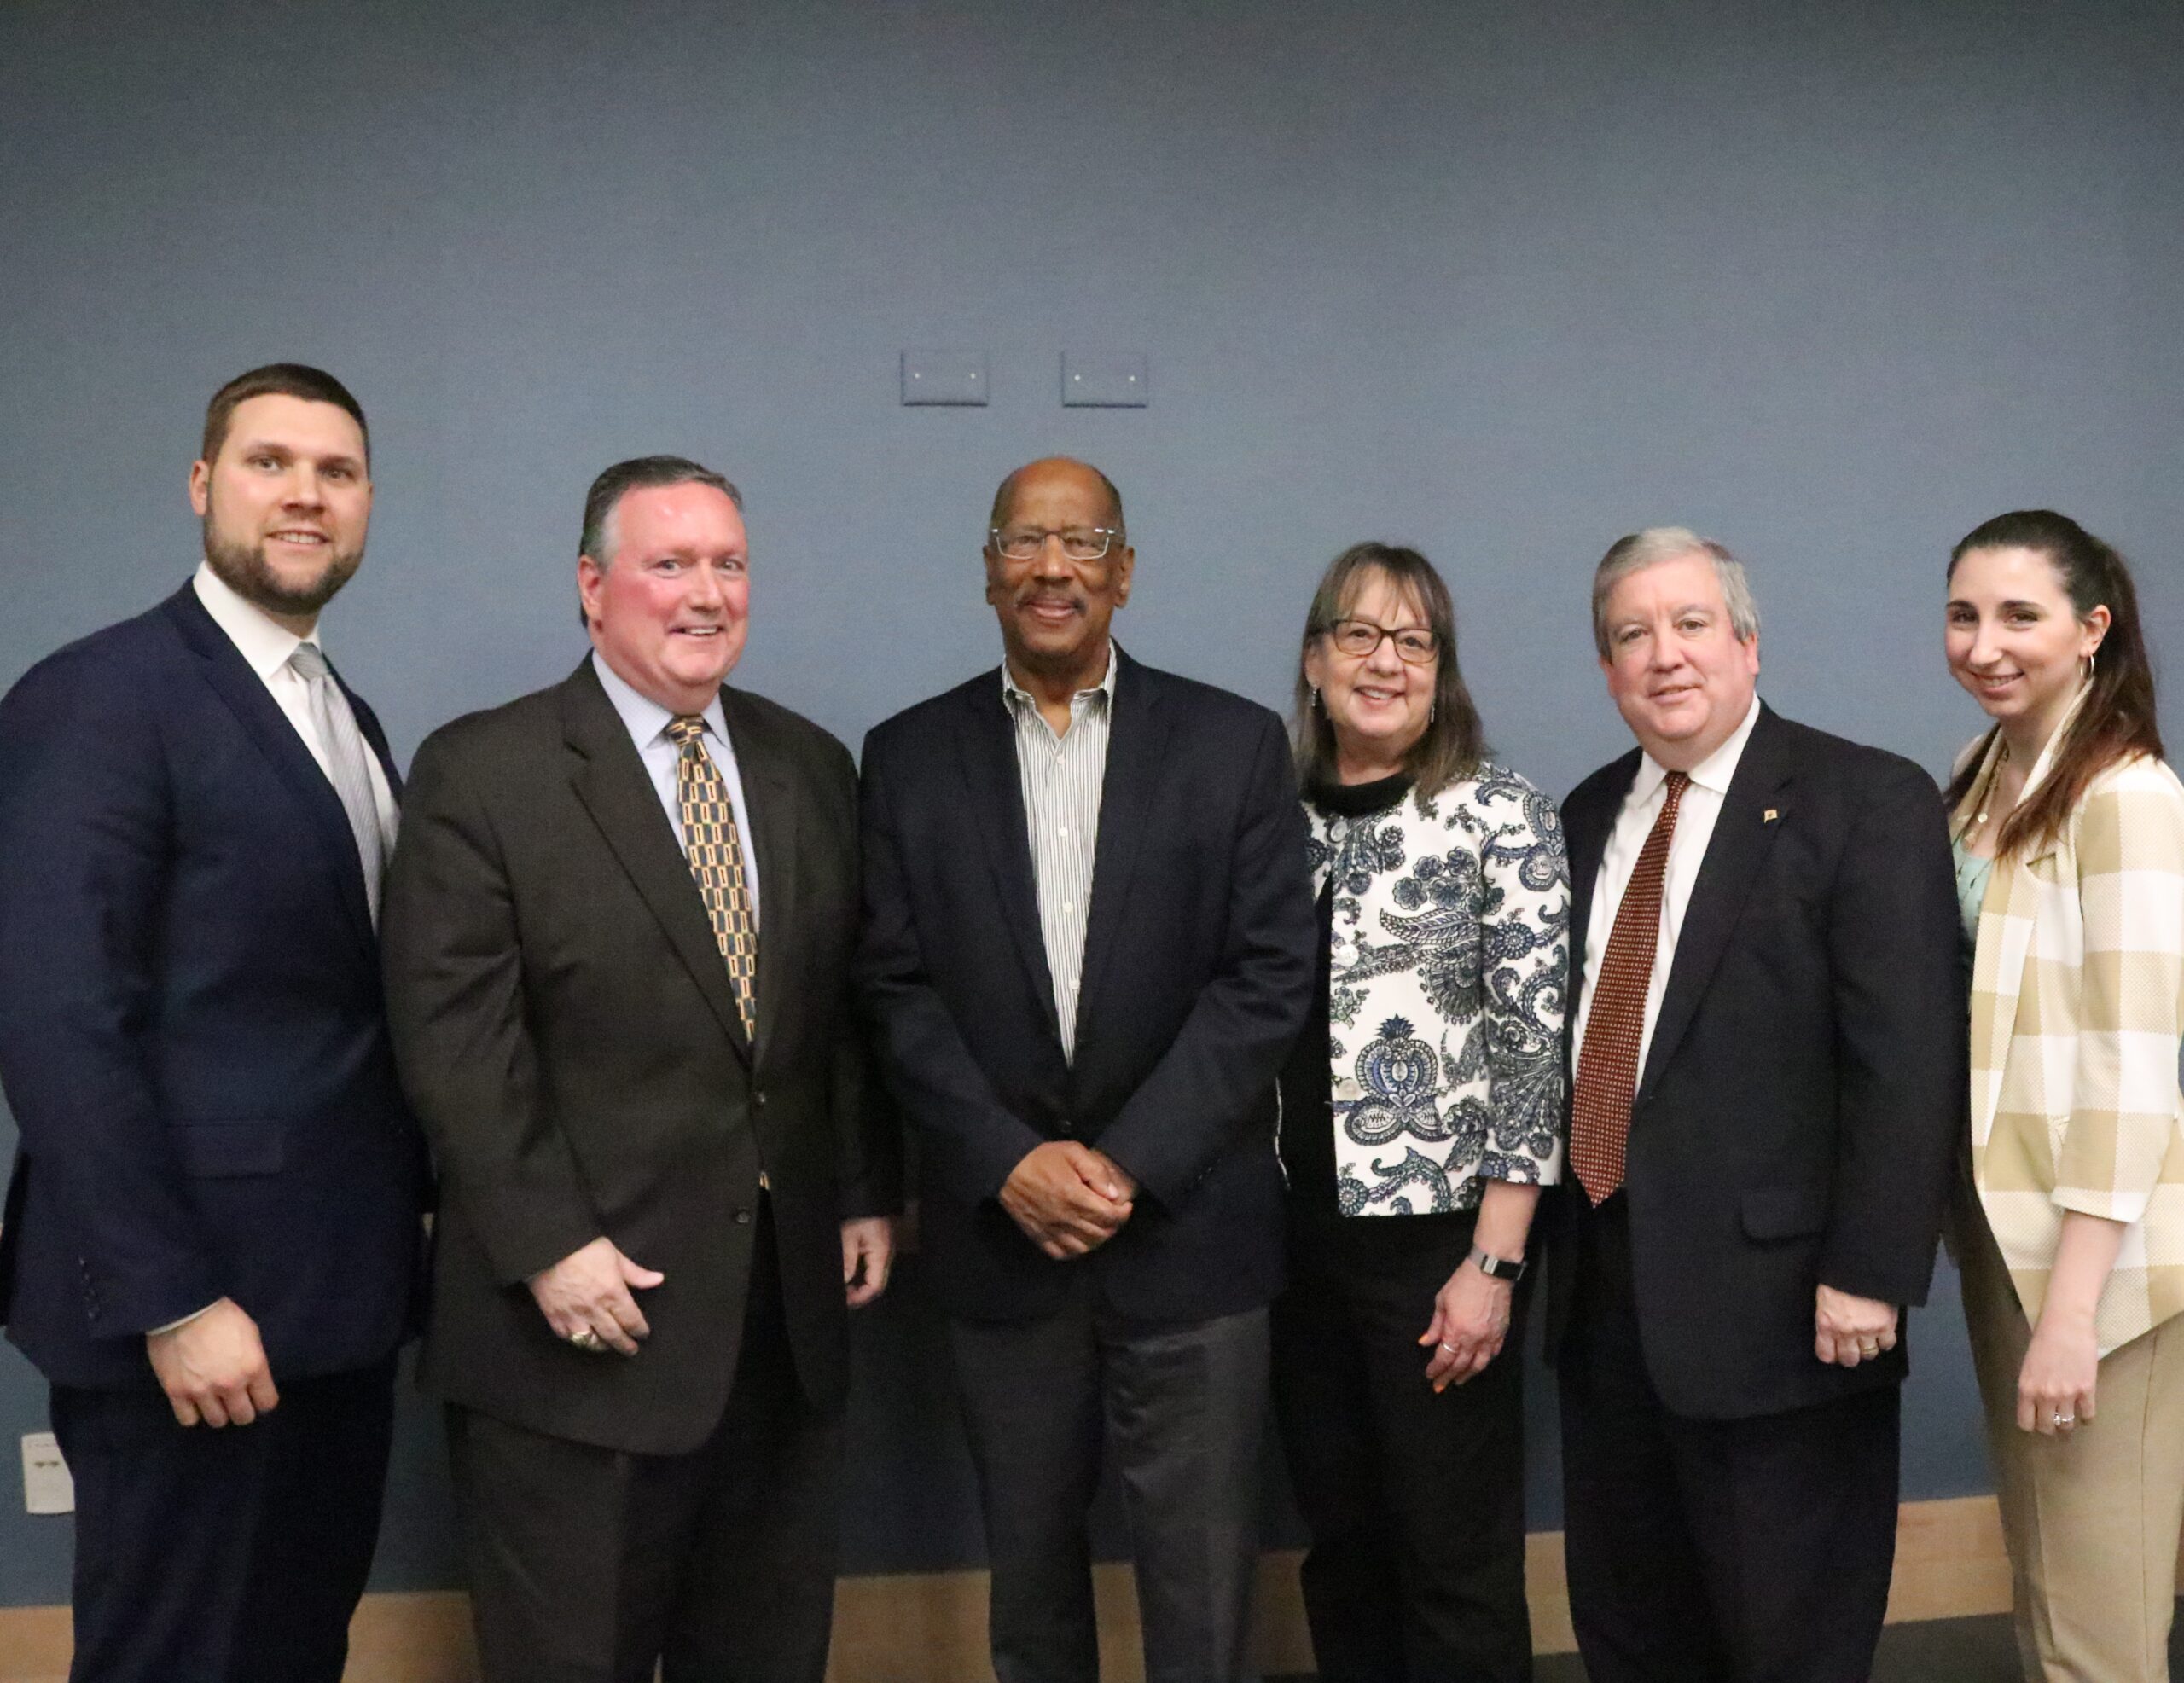 From left to right: NJBIA's Andrew Musick; Jim Venere, of KPMG, LLP; Assemblyman Gordon Johnson; Deborah Bierbaum of AT&T; Michael Eganton and Laura Hahn of the State Chamber of Commerce